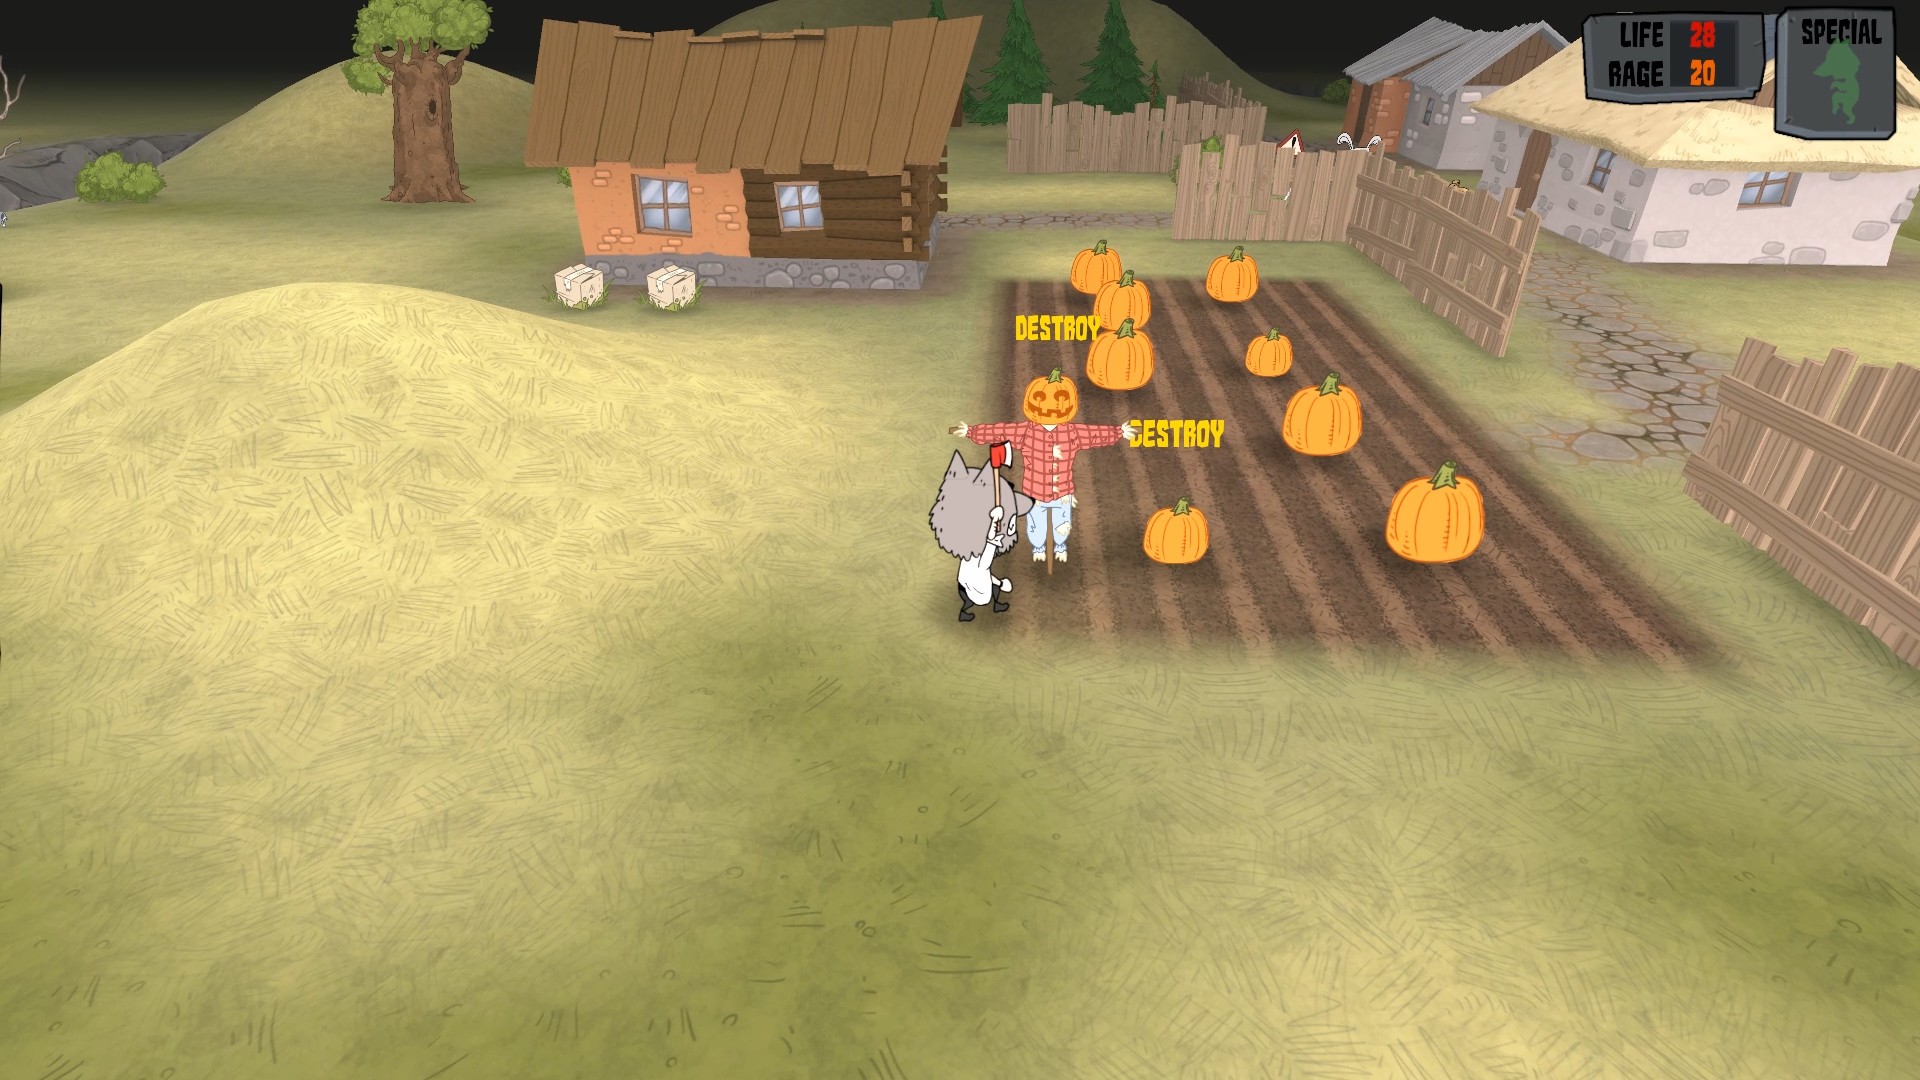 Wolf Game - videos matching trying out a furry game on roblox wolves